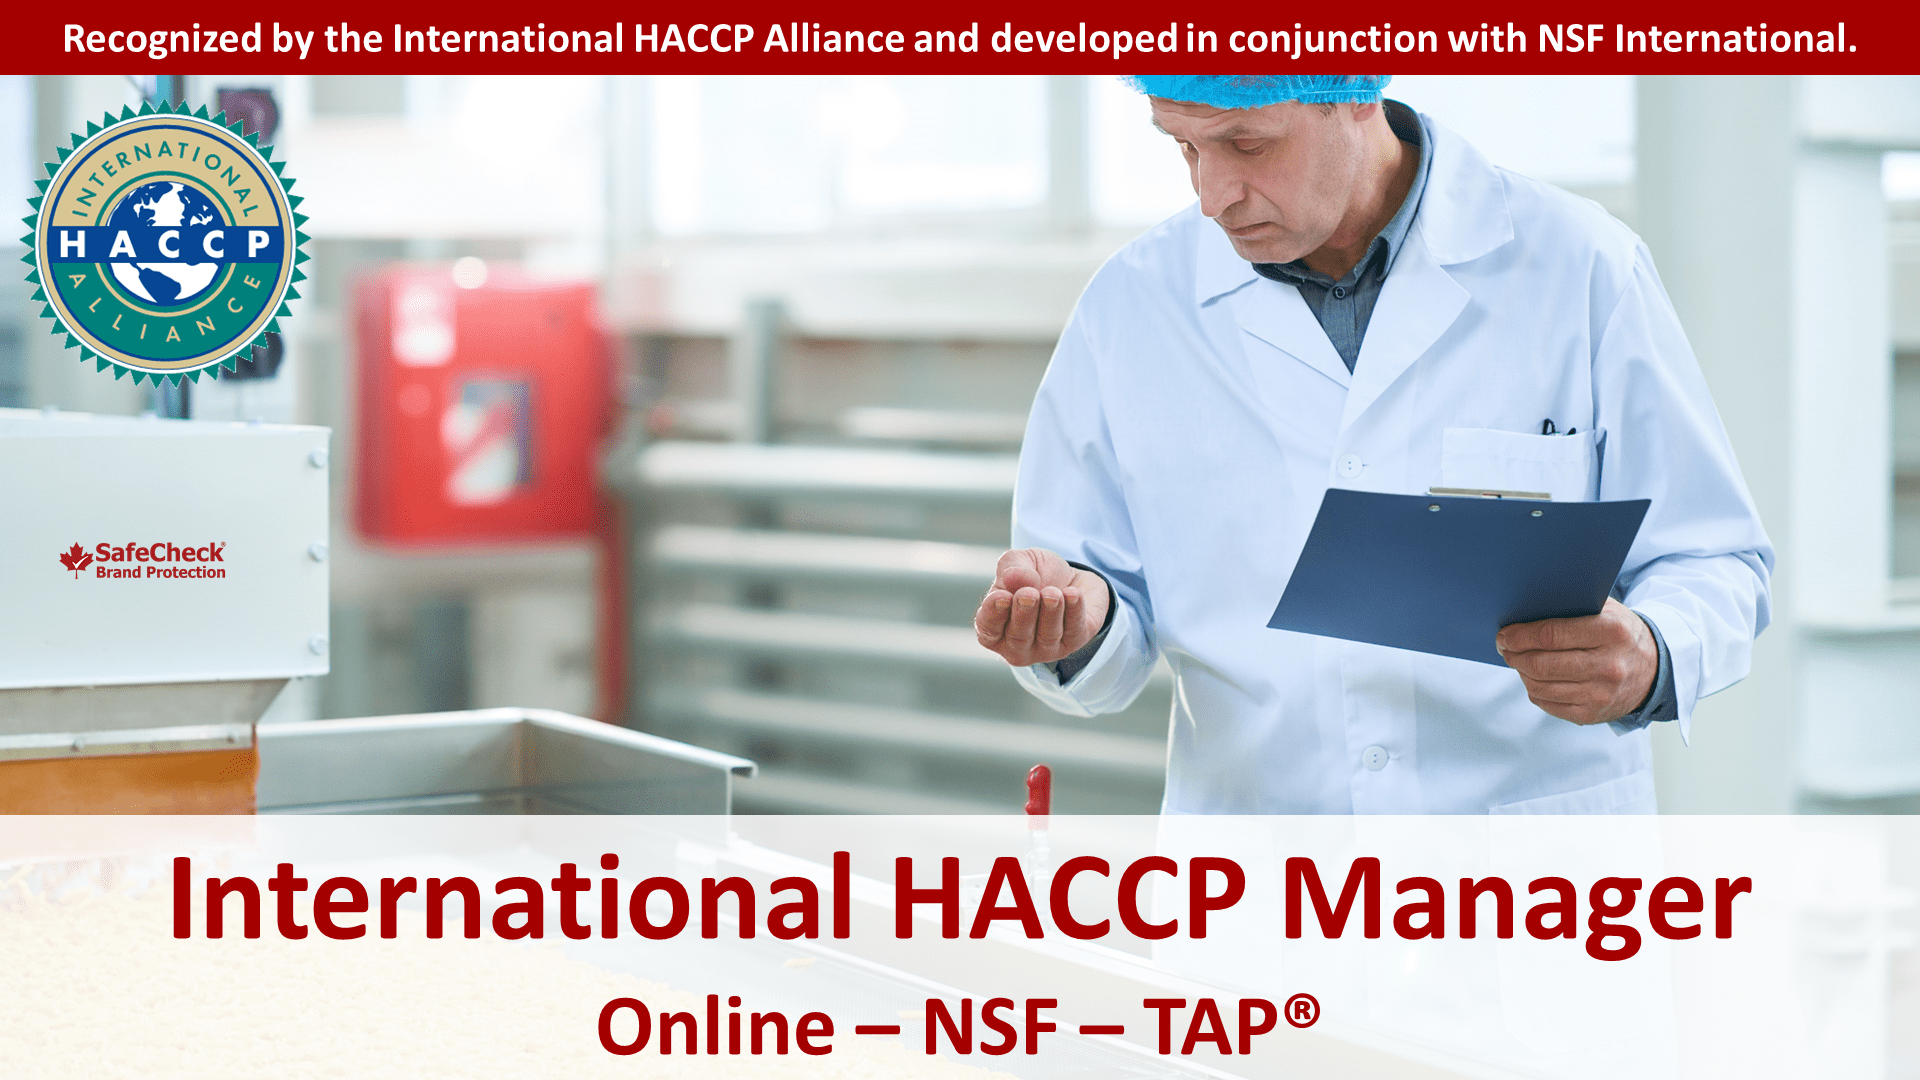 HACCP manager inspecting food